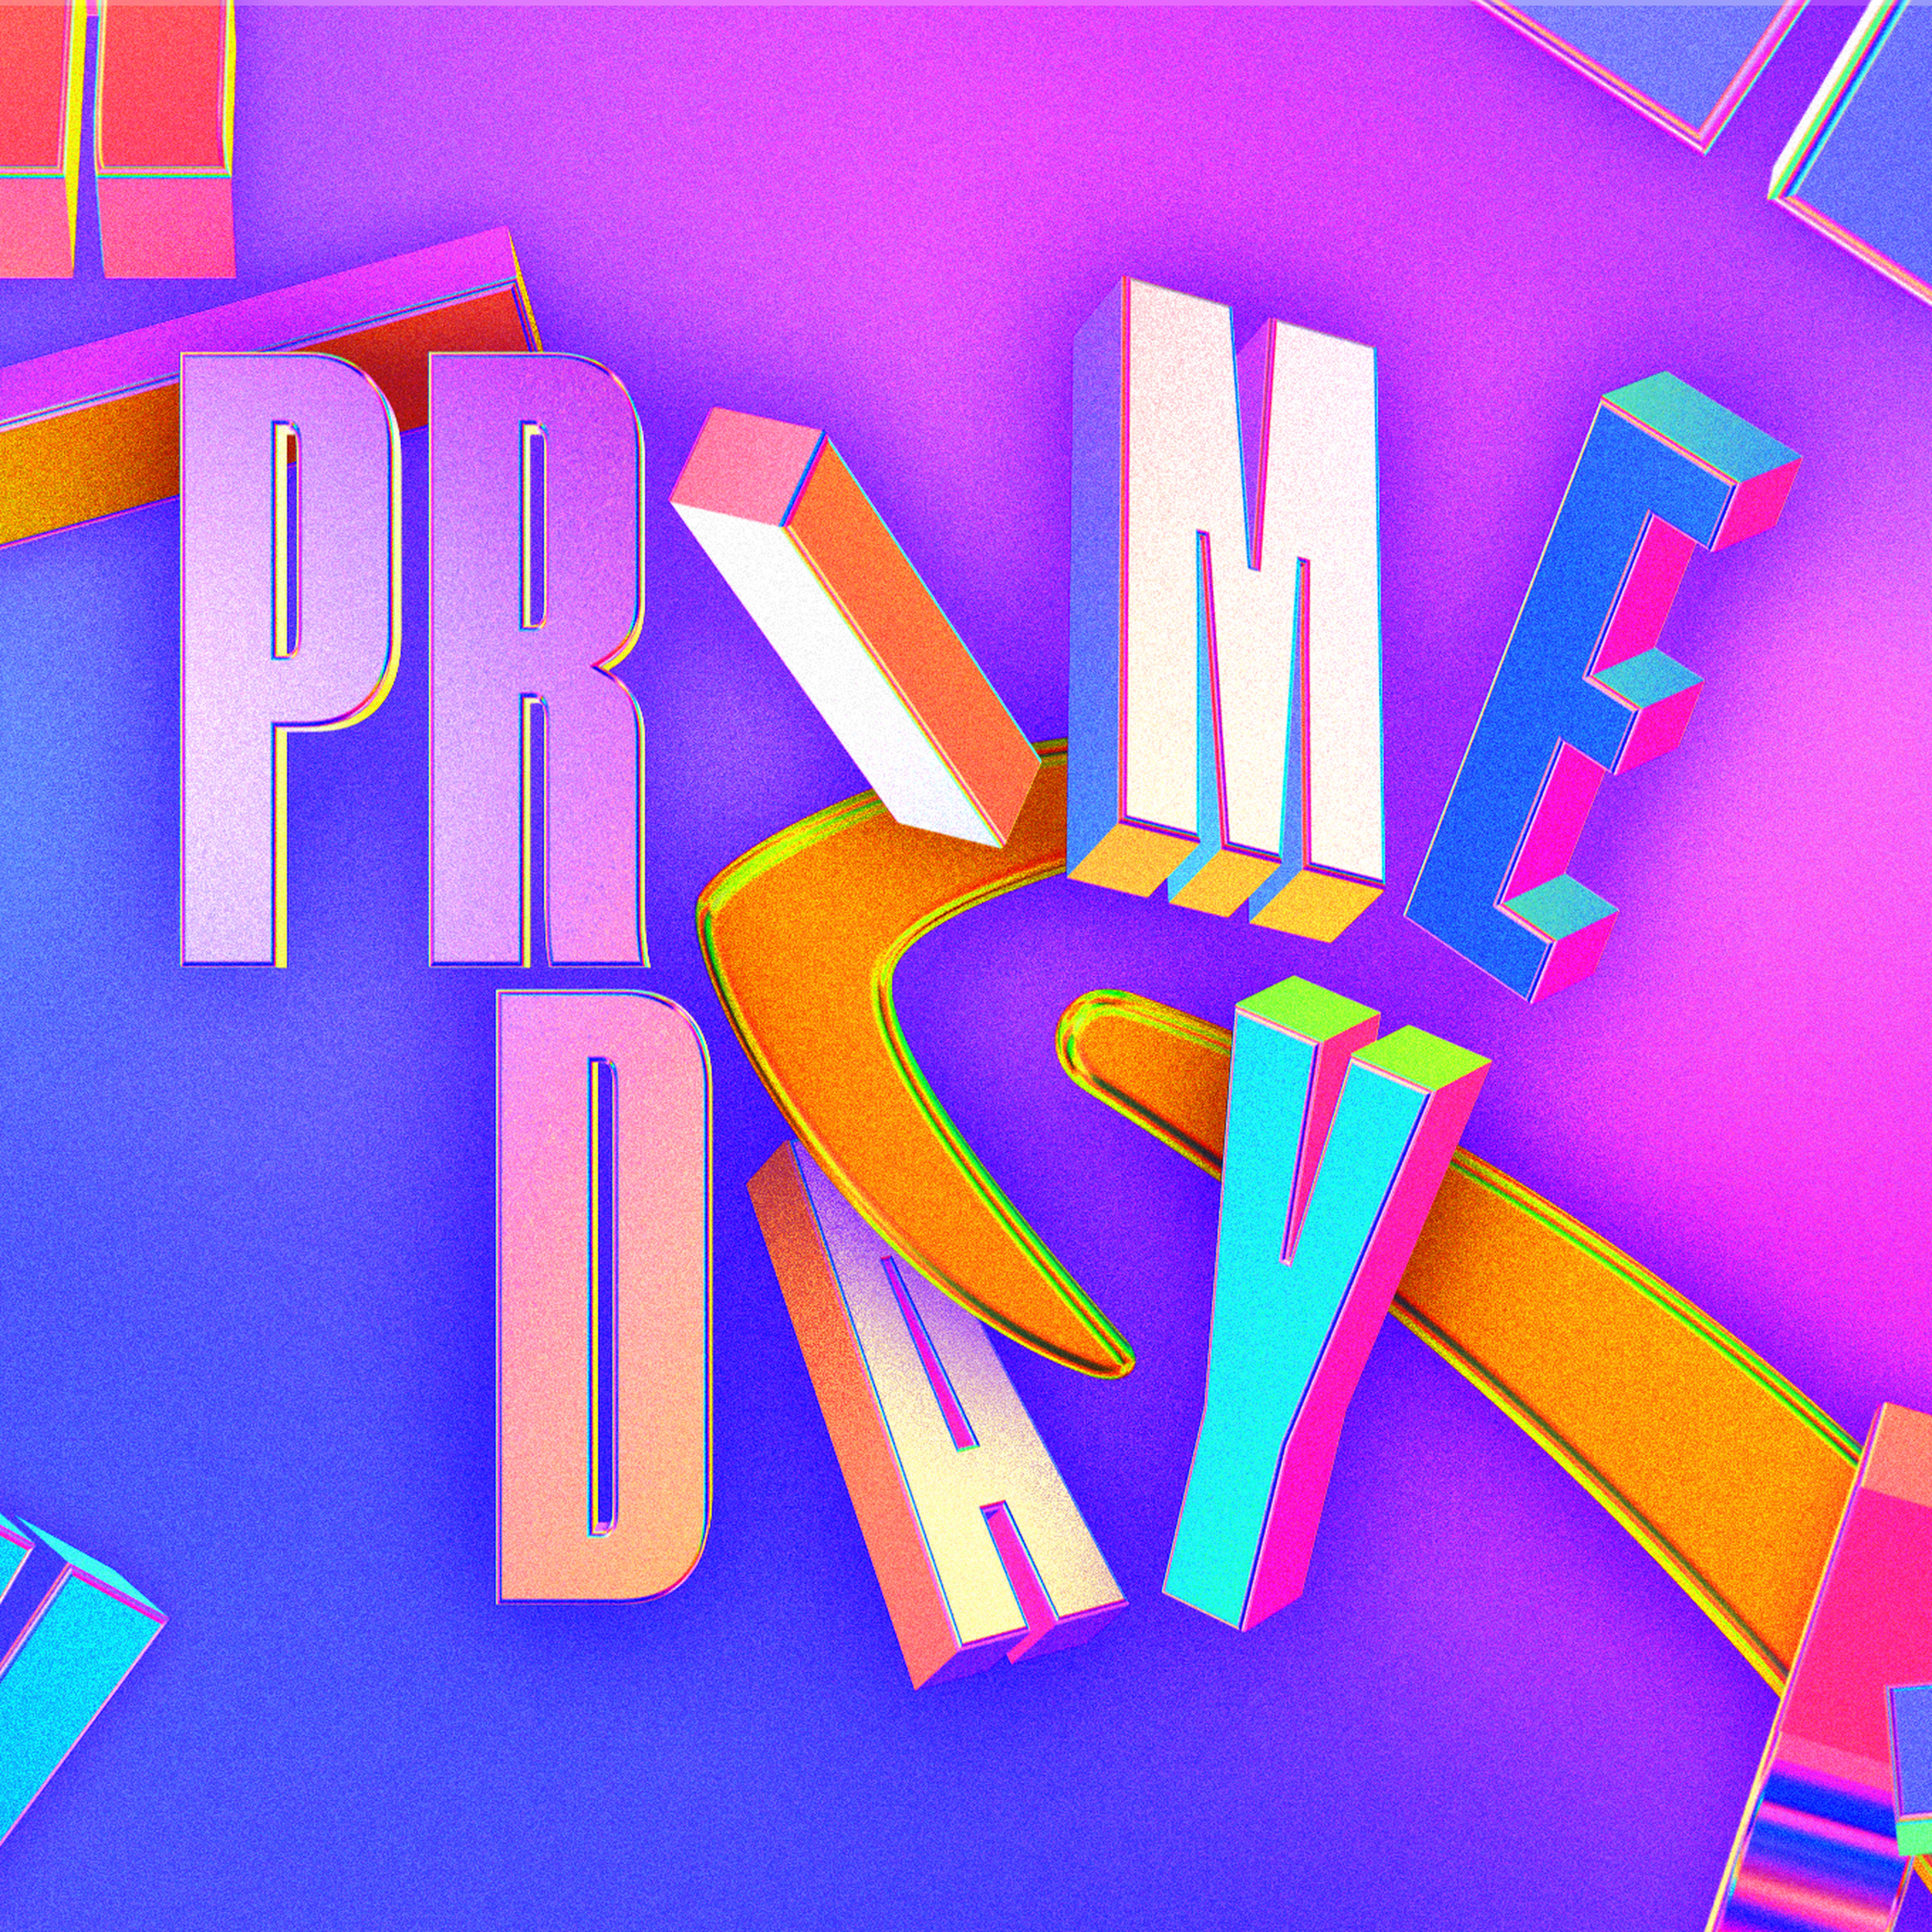 Illustration featuring soft gradients of the letters that spell Prime Day being pushed aside by an Amazon arrow.